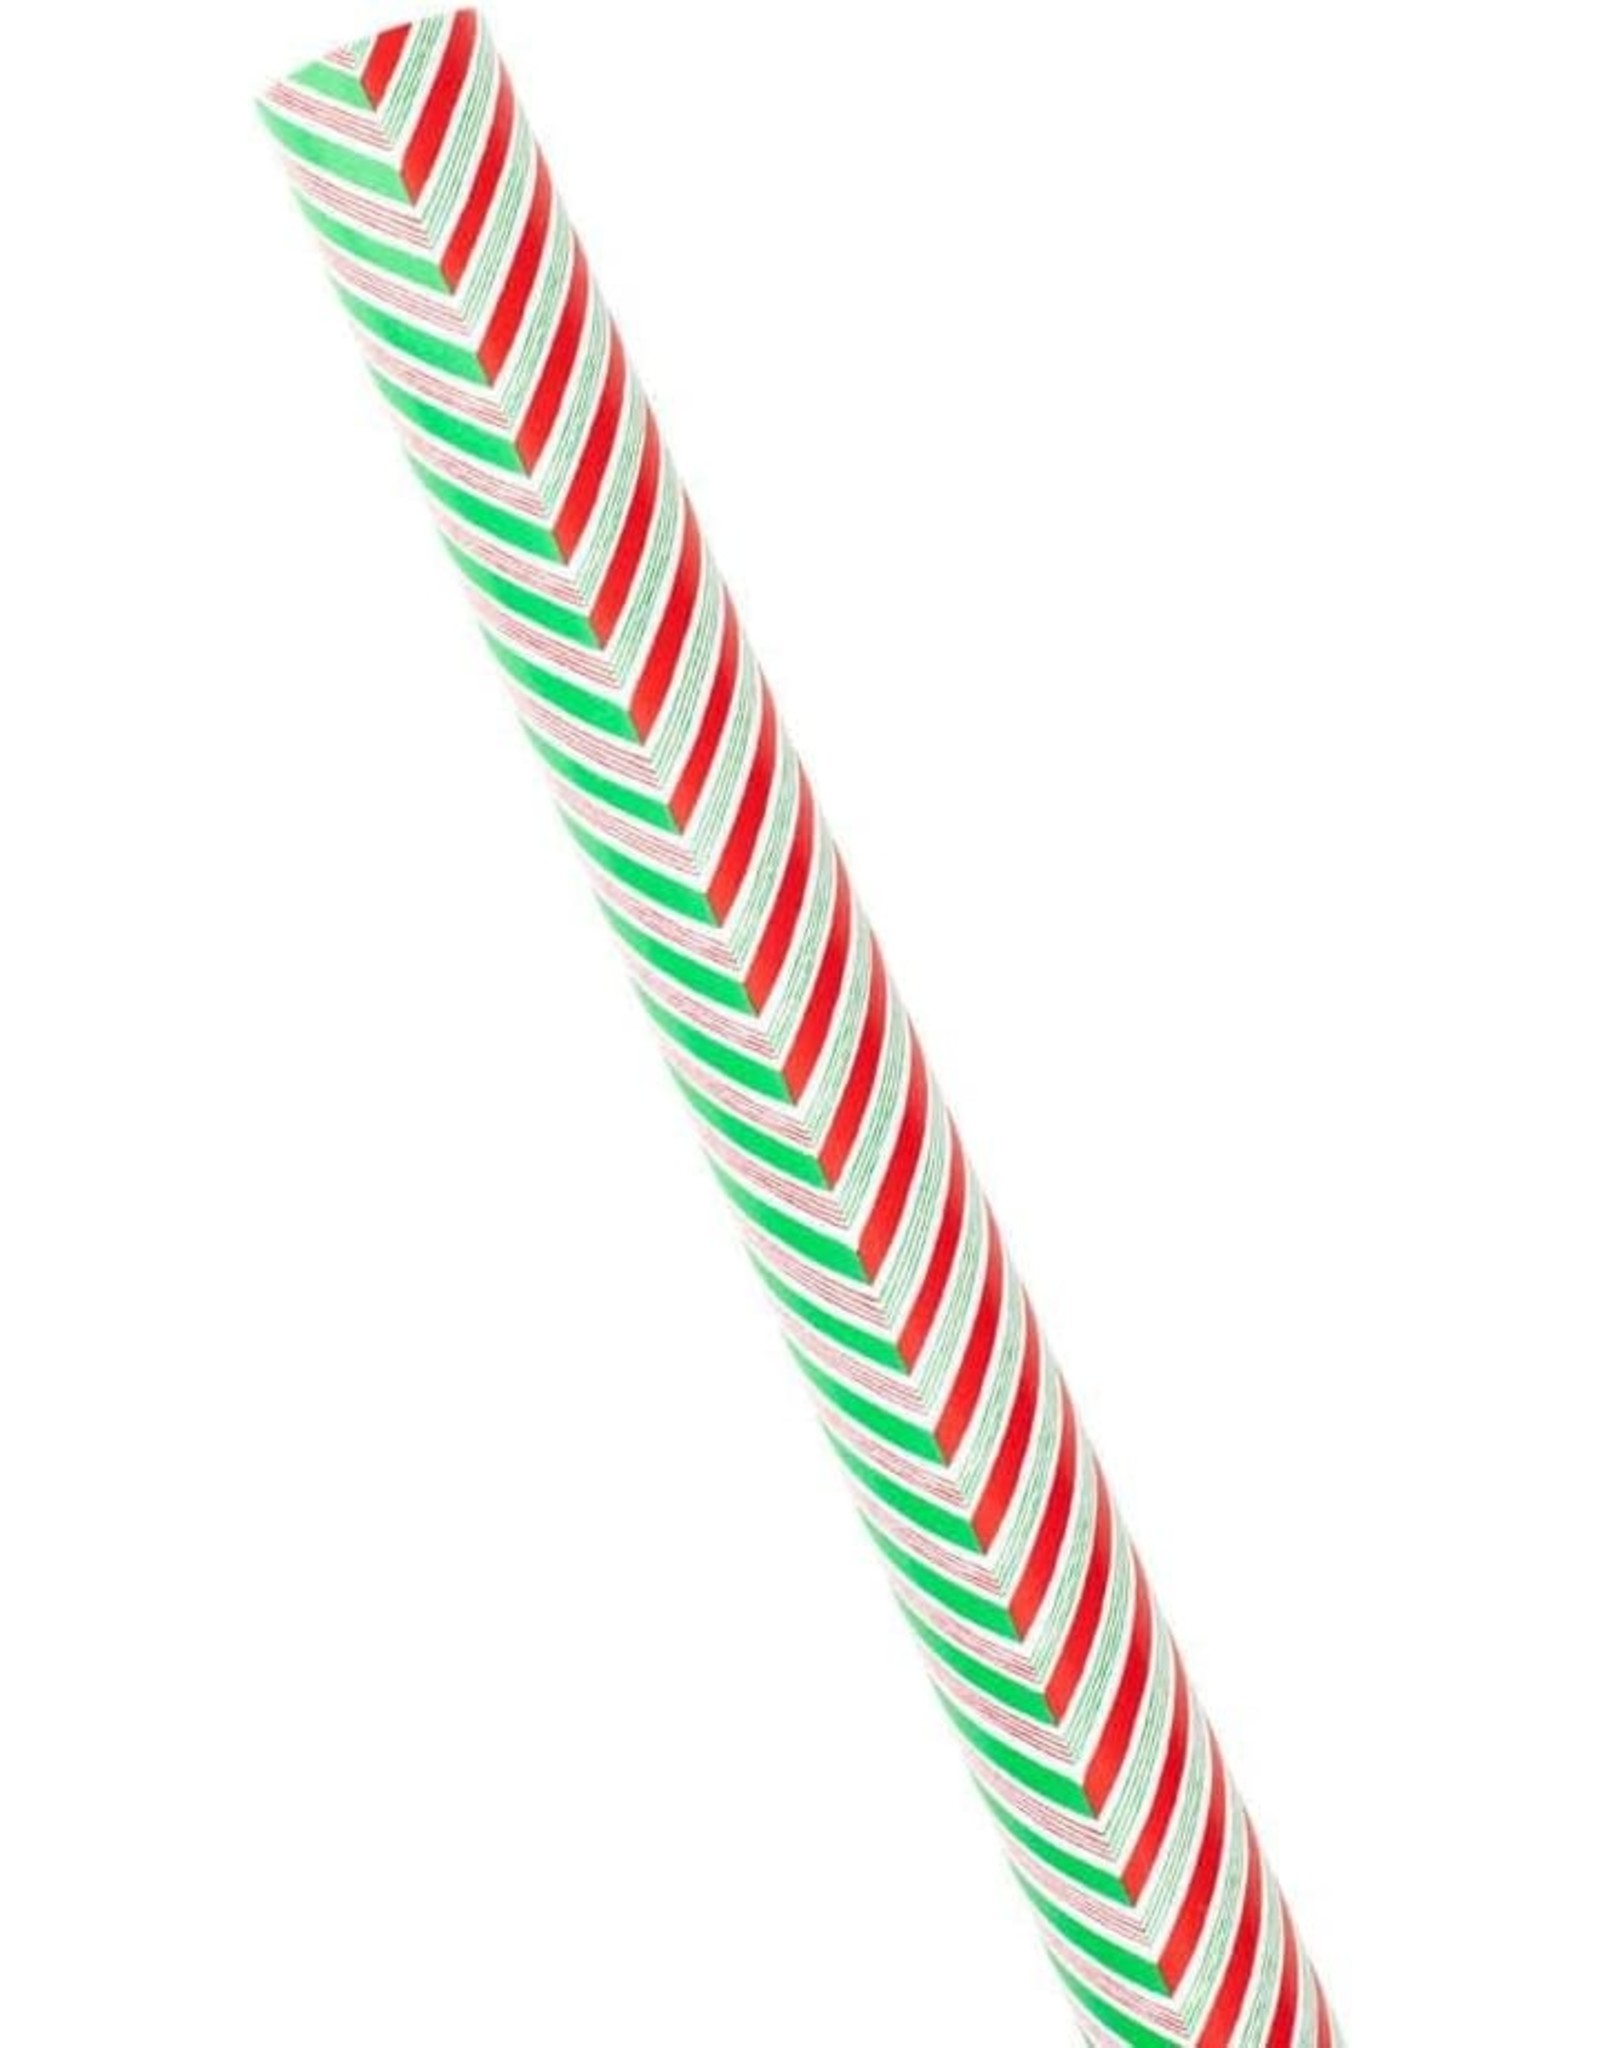 Caspari Christmas Gift Wrapping Paper 8ft Roll Candy Cane Stripes